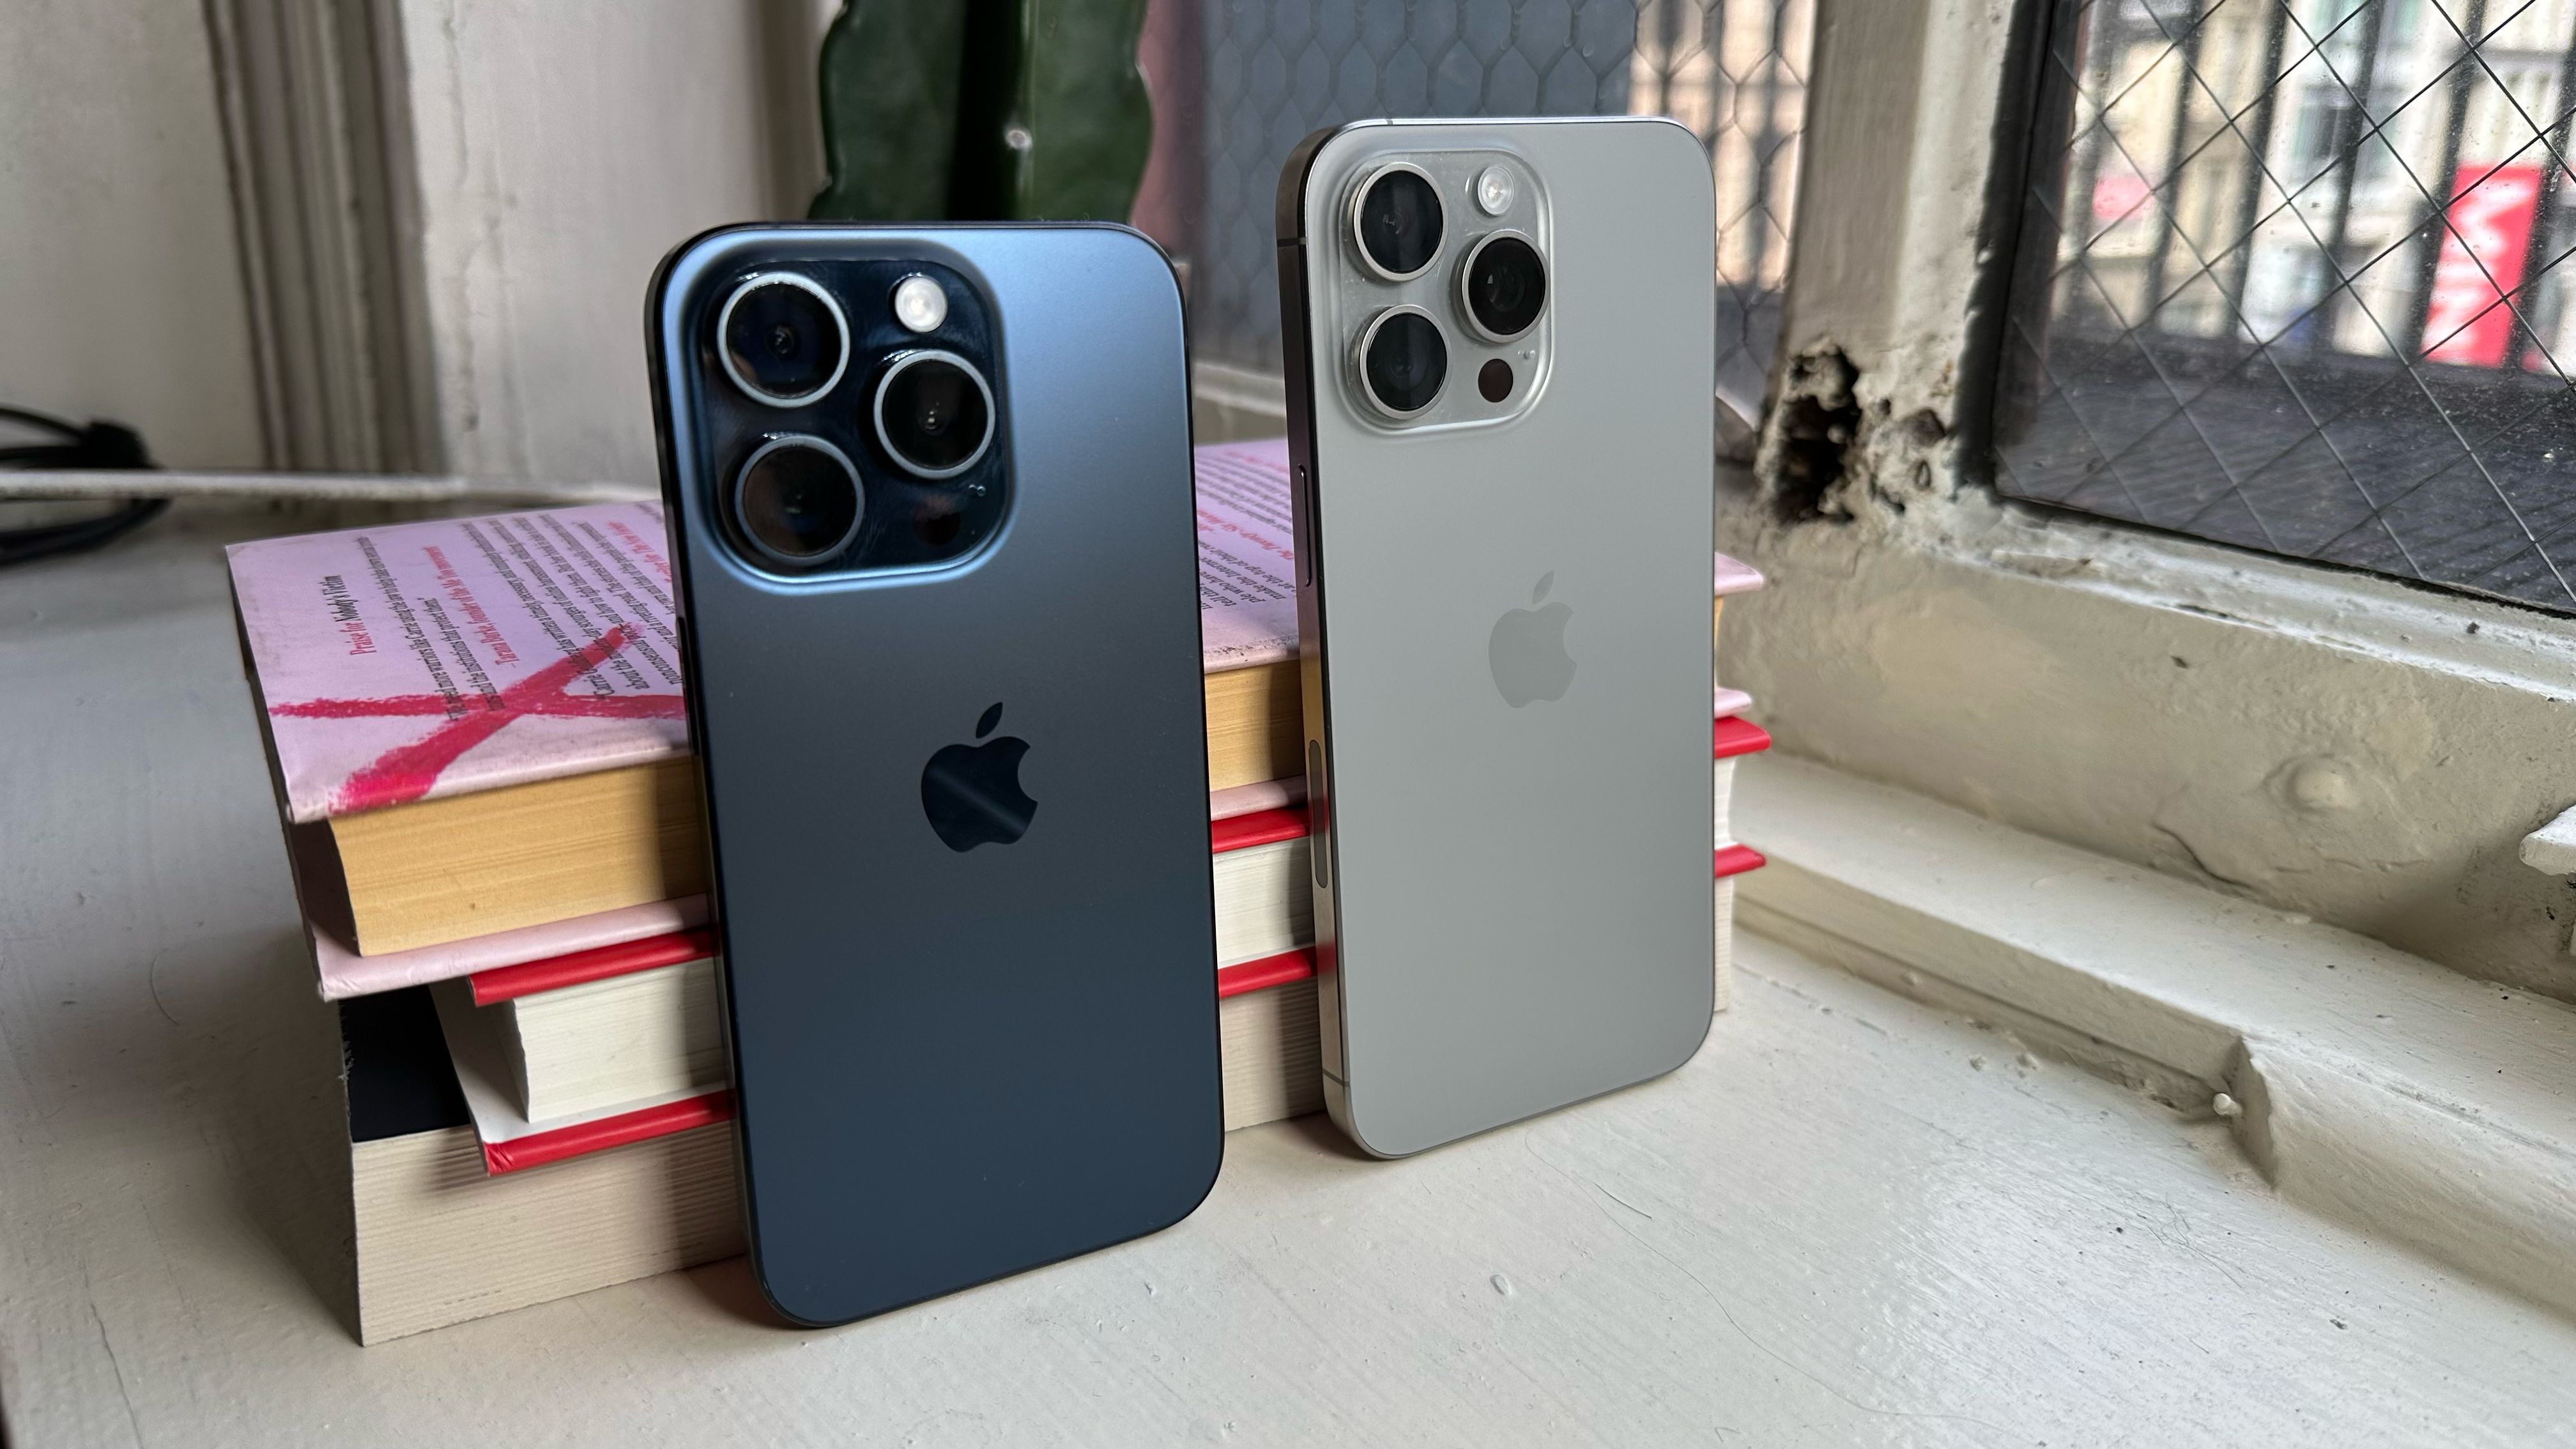 iPhone 15 Pro review: Coming from iPhone 12 Pro or earlier? This